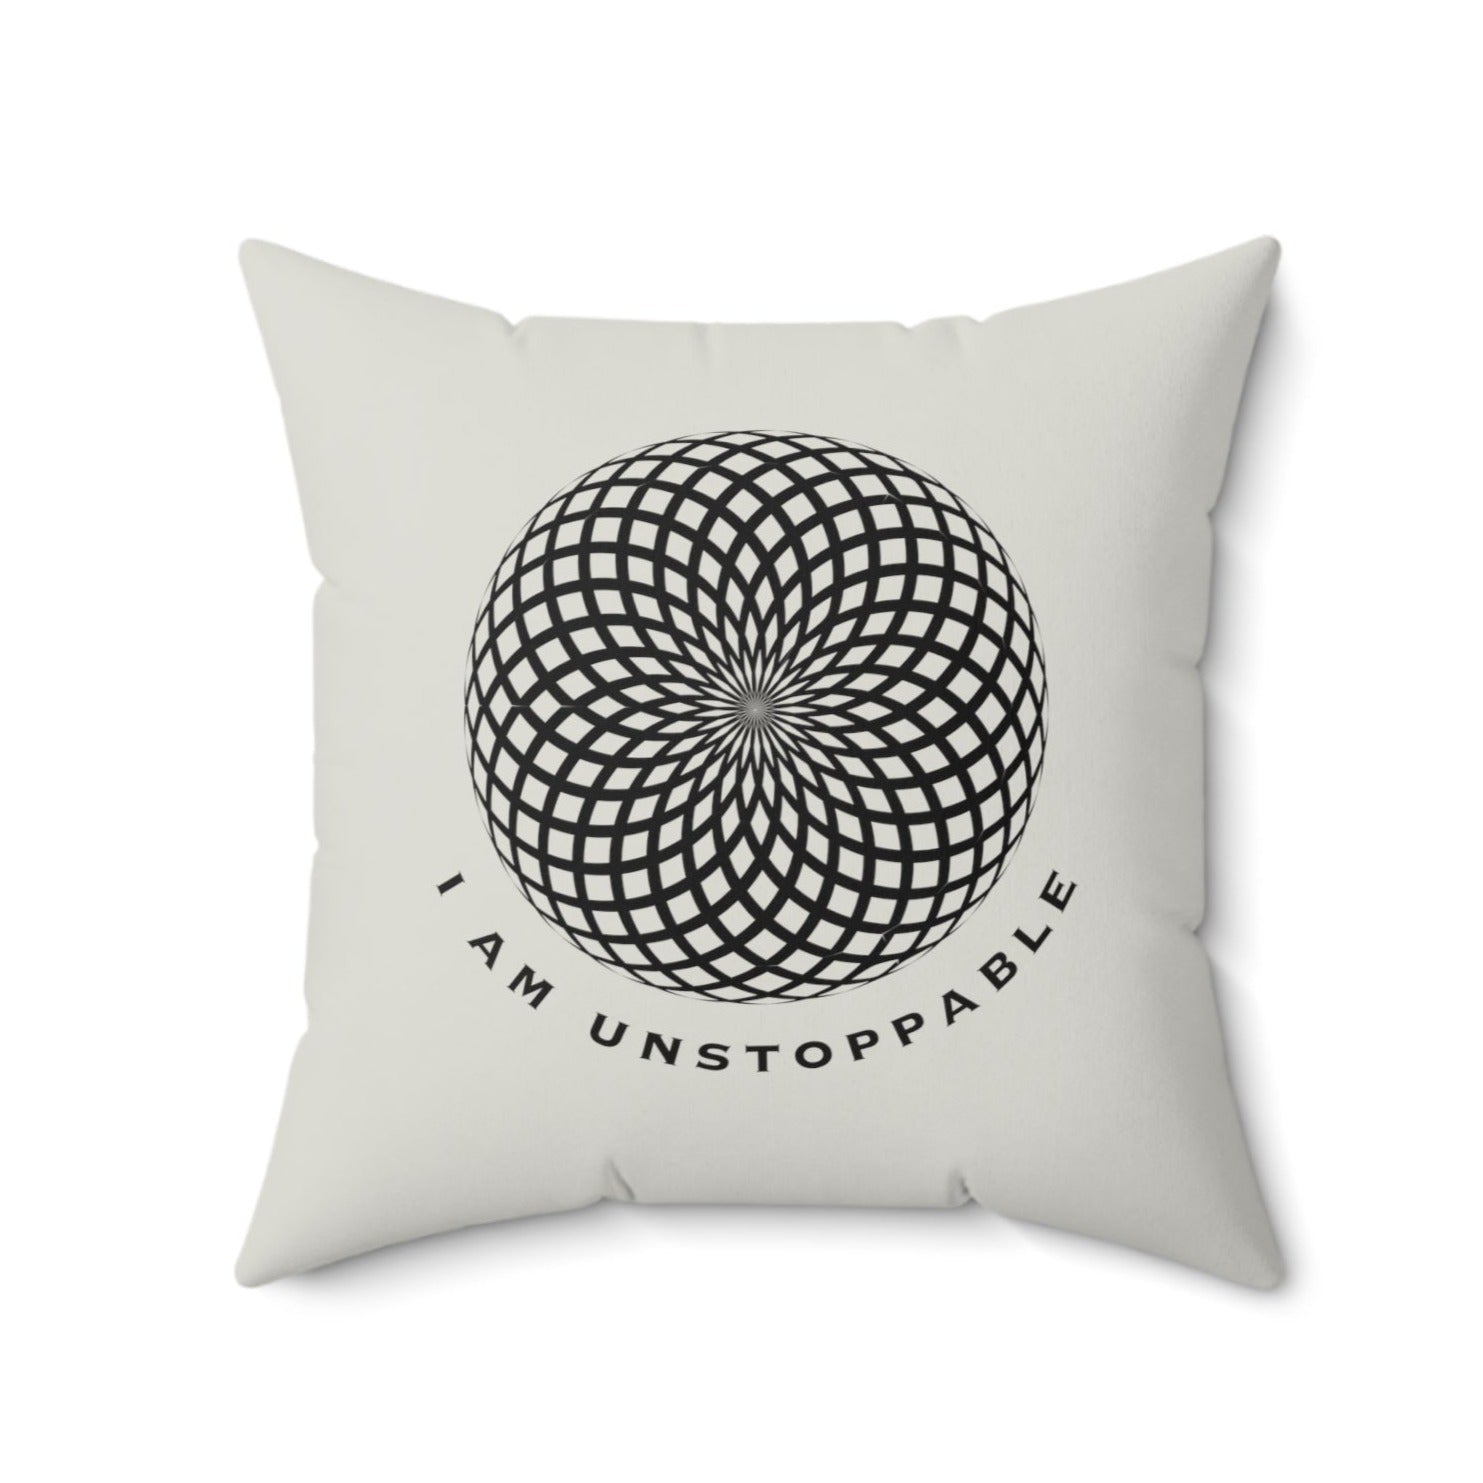 I Am Unstoppable affirmation pillow